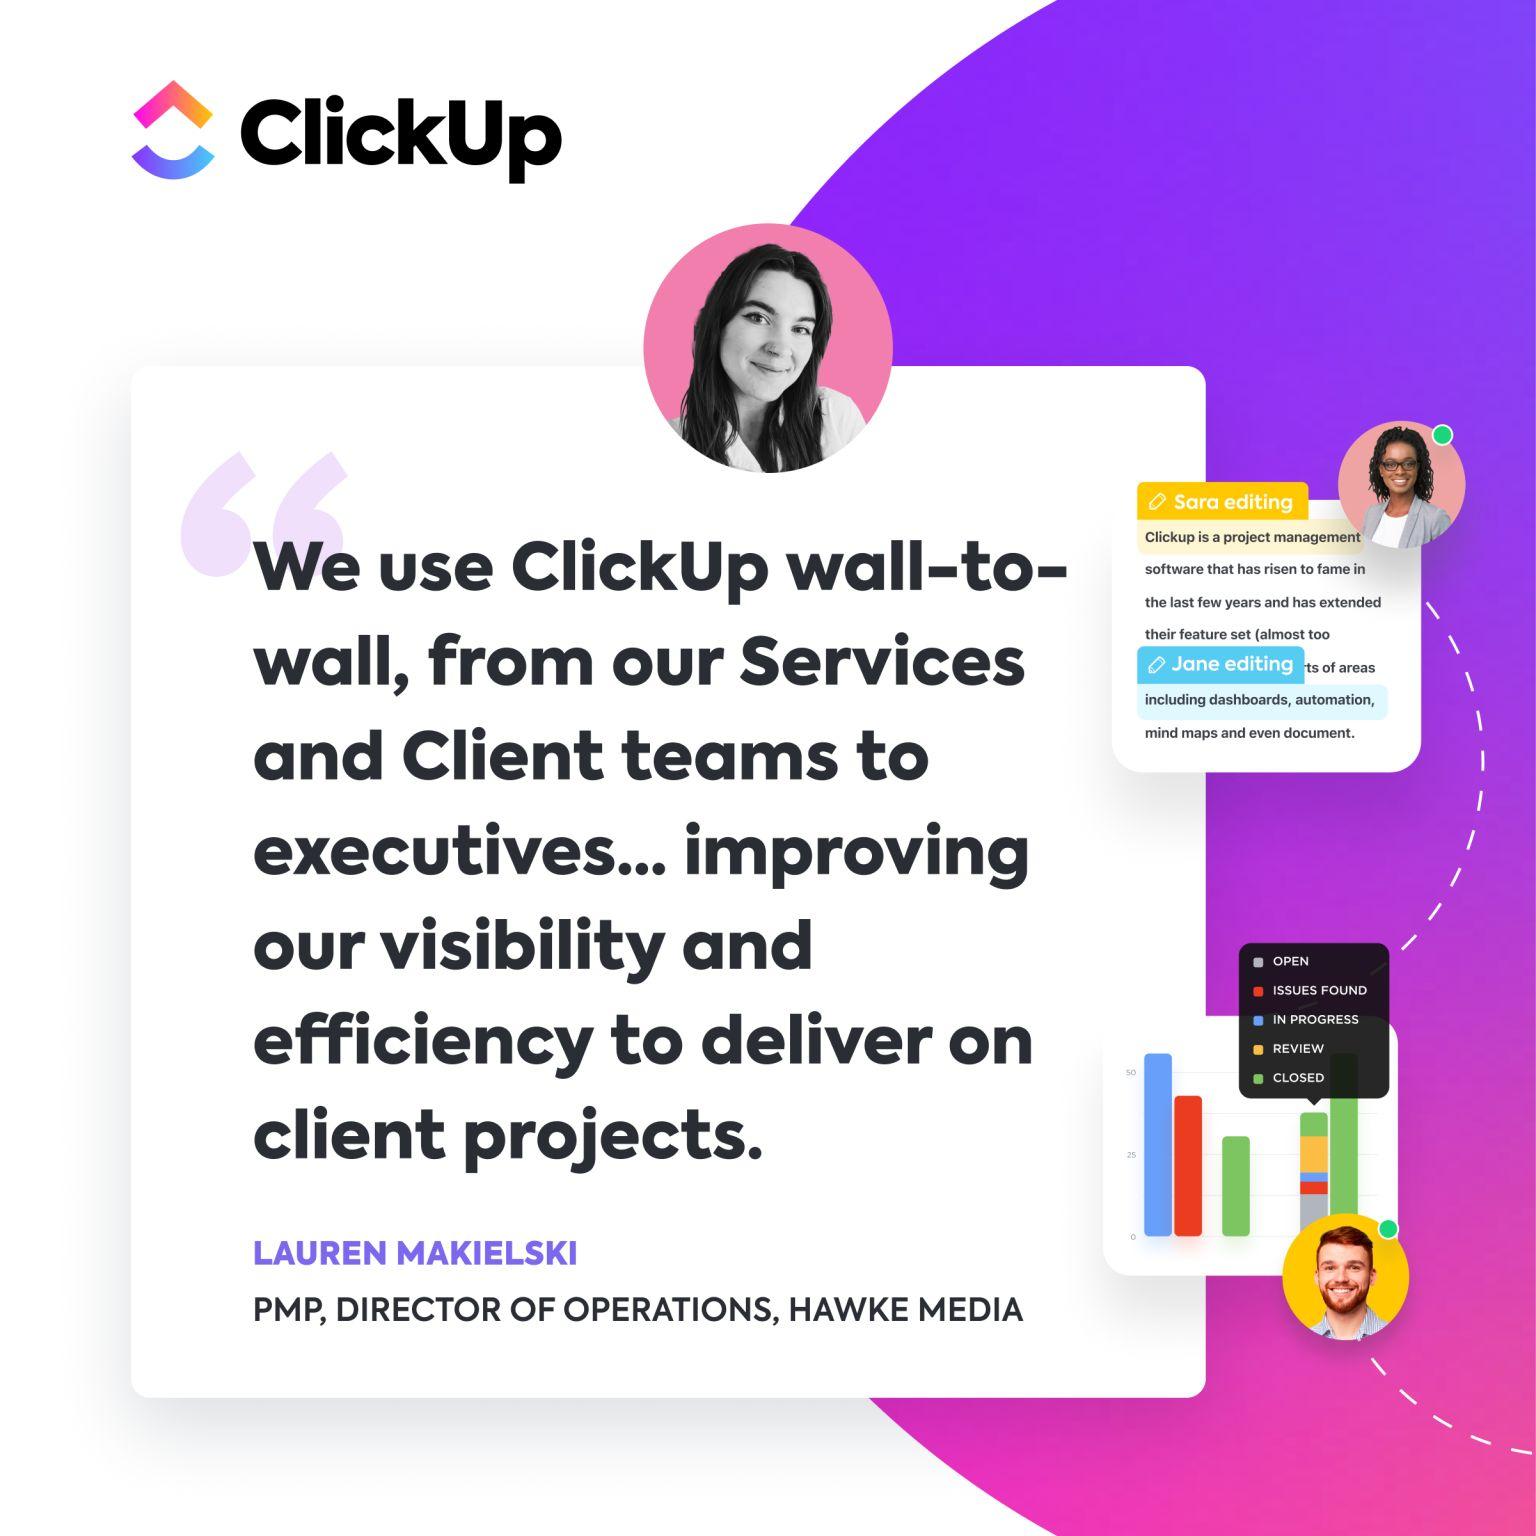 Hawke Media uses ClickUp to deliver client projects and meet customer expectations